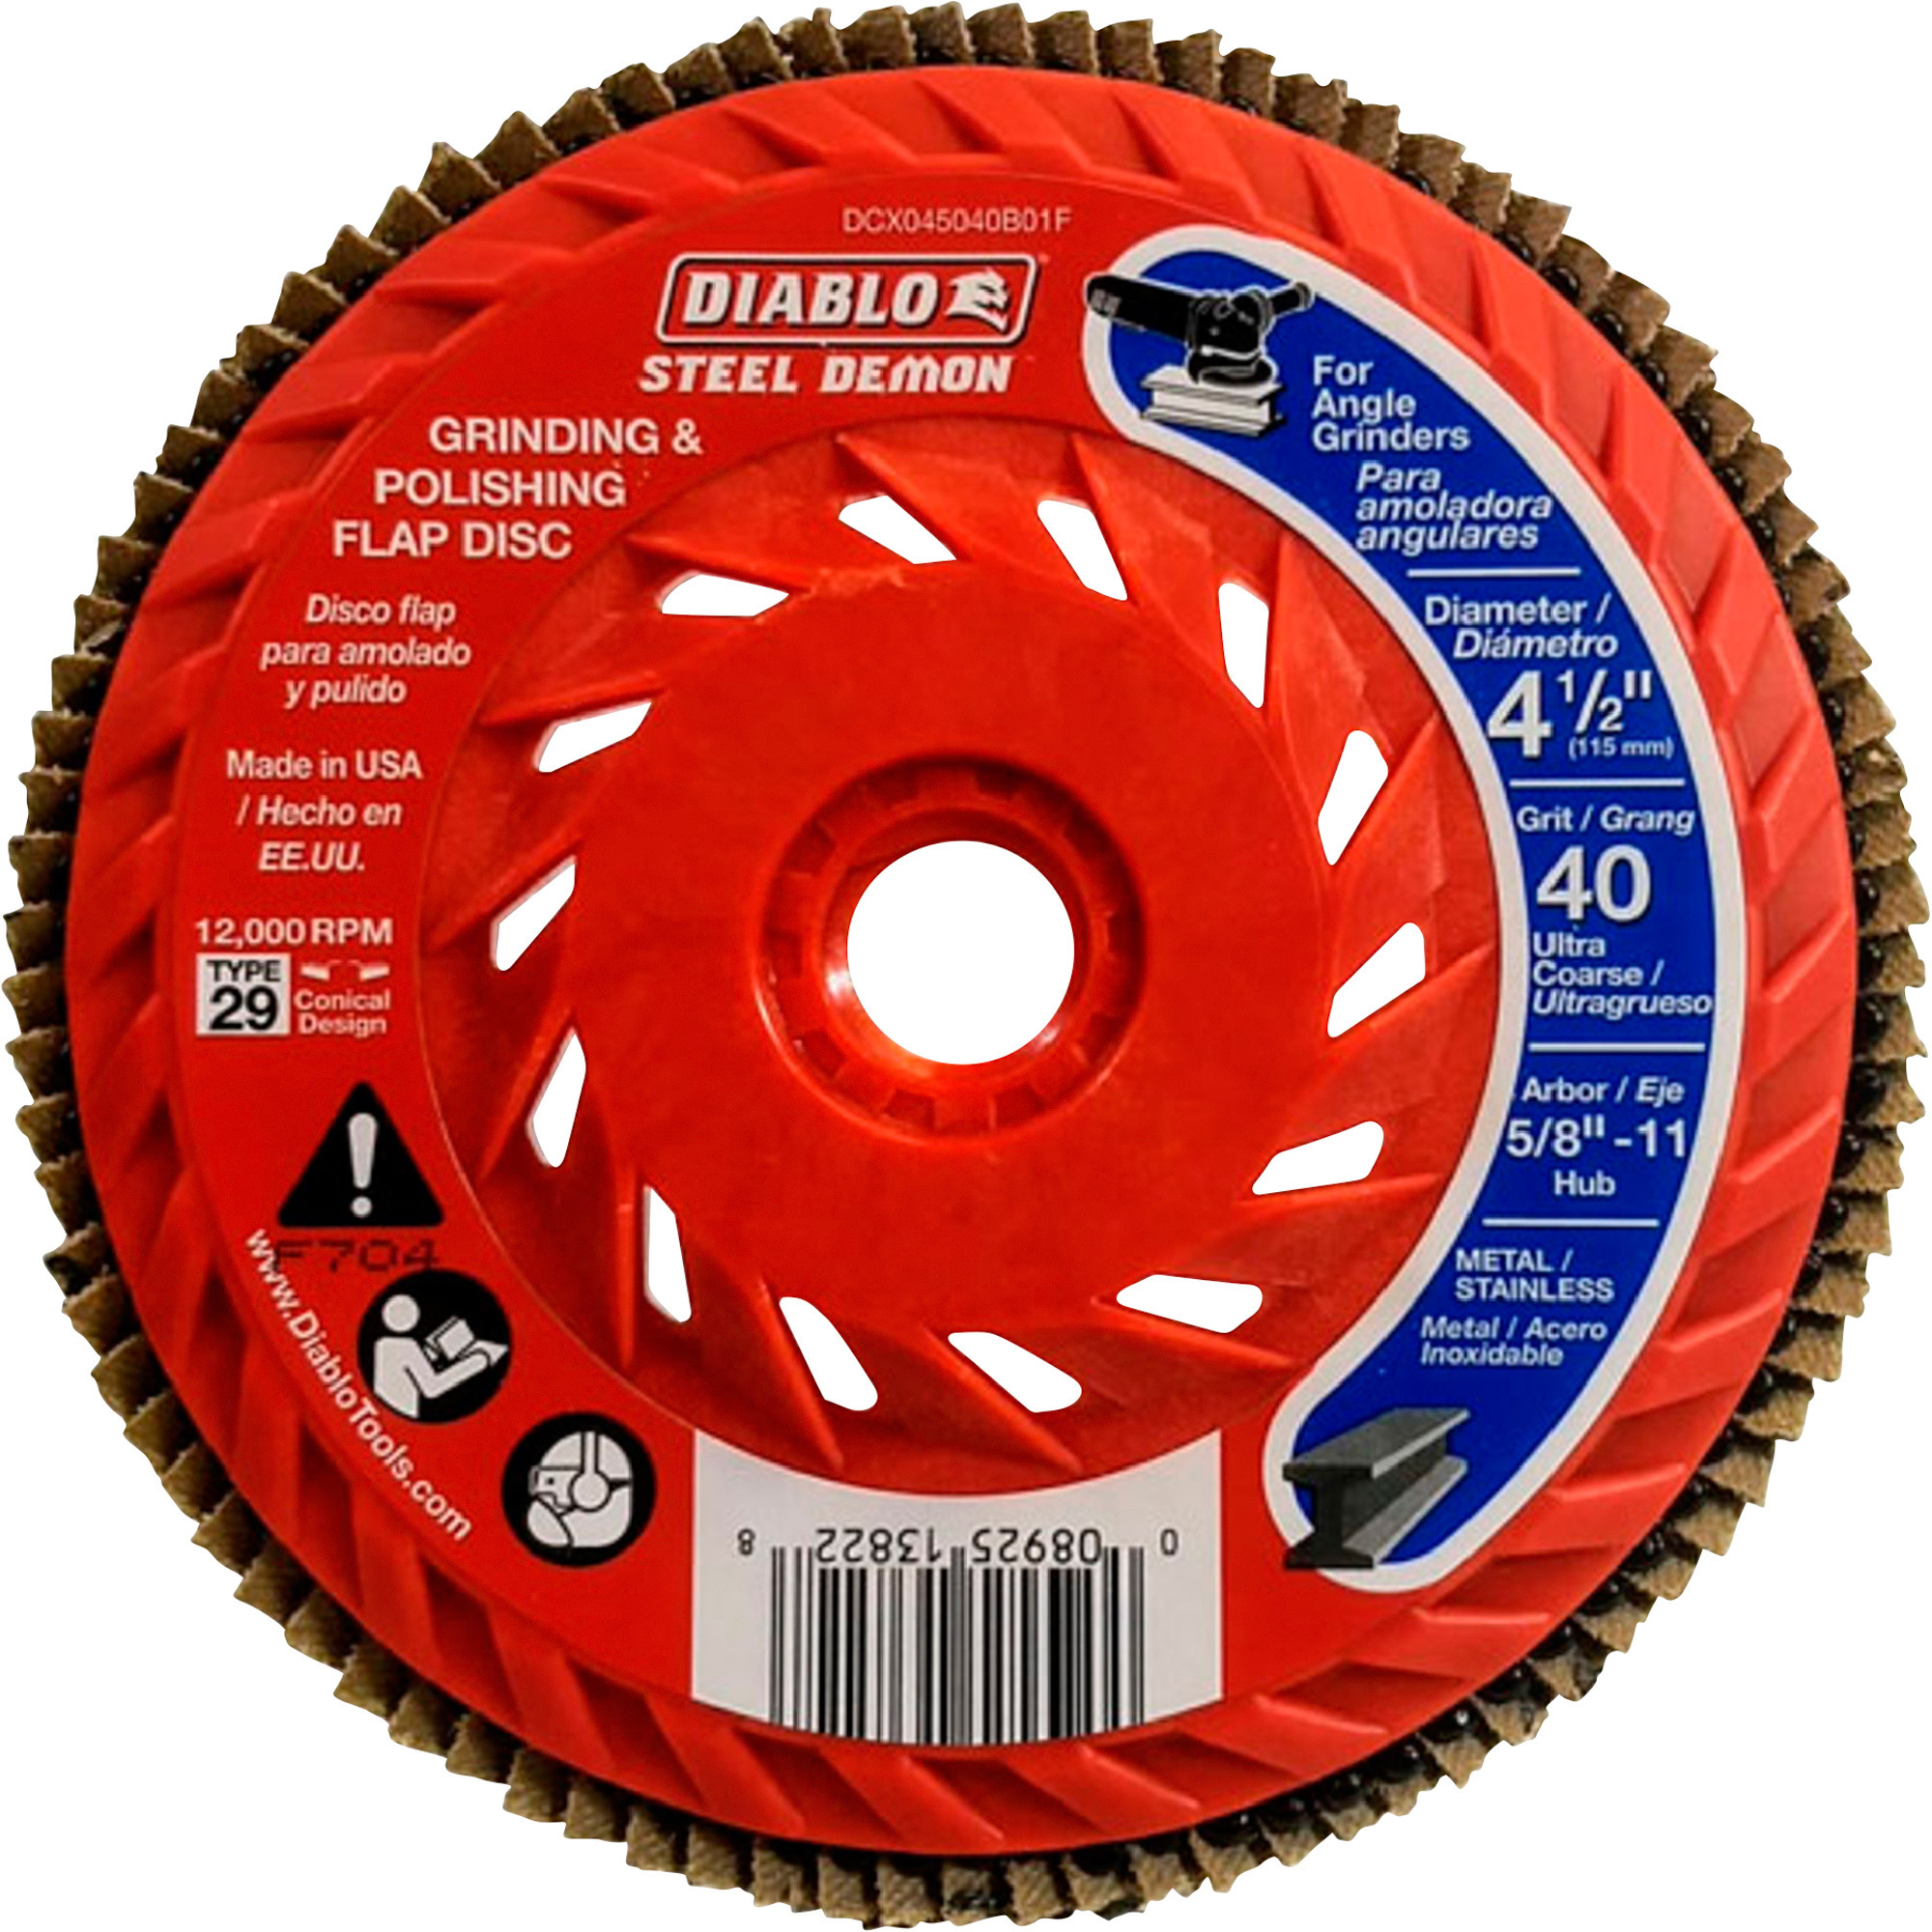 Diablo Speed Demon Flap Disc, 4 1/2Inch, 40 Grit Conical, With Speed Hub, Model DCX045040B01F